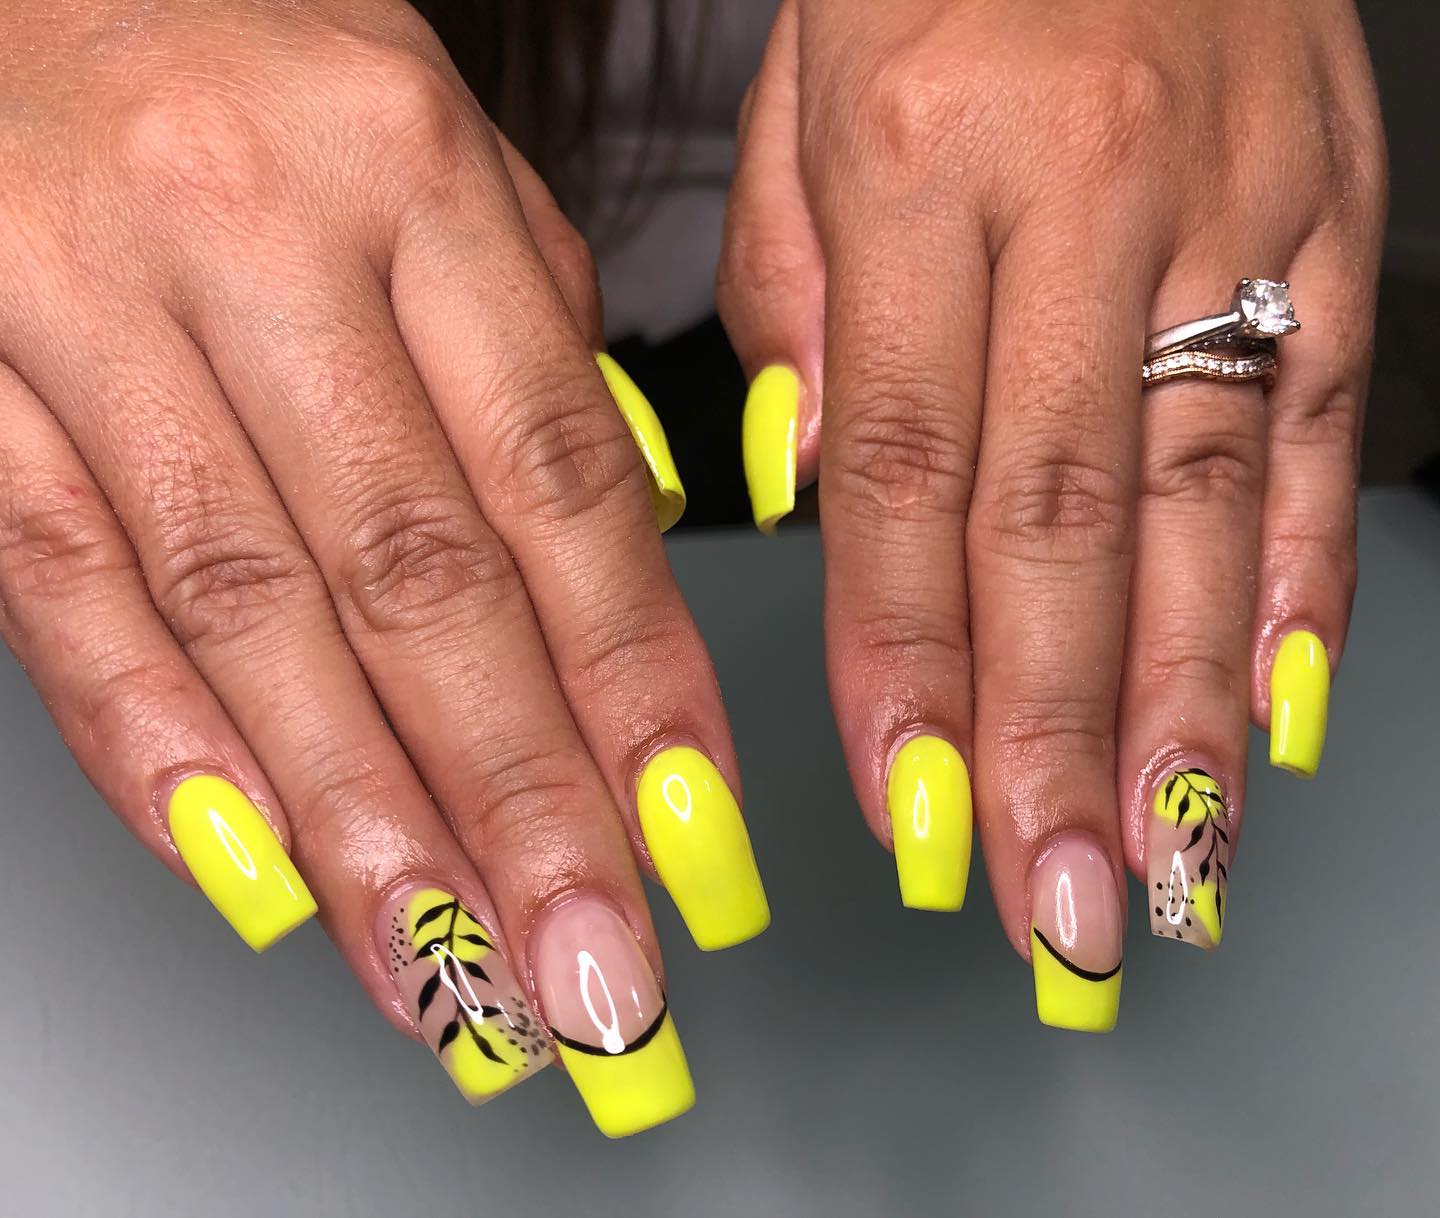 This warm yellow neon nails look great with accent nails. French tips and leaves nail arts will give a different energy.